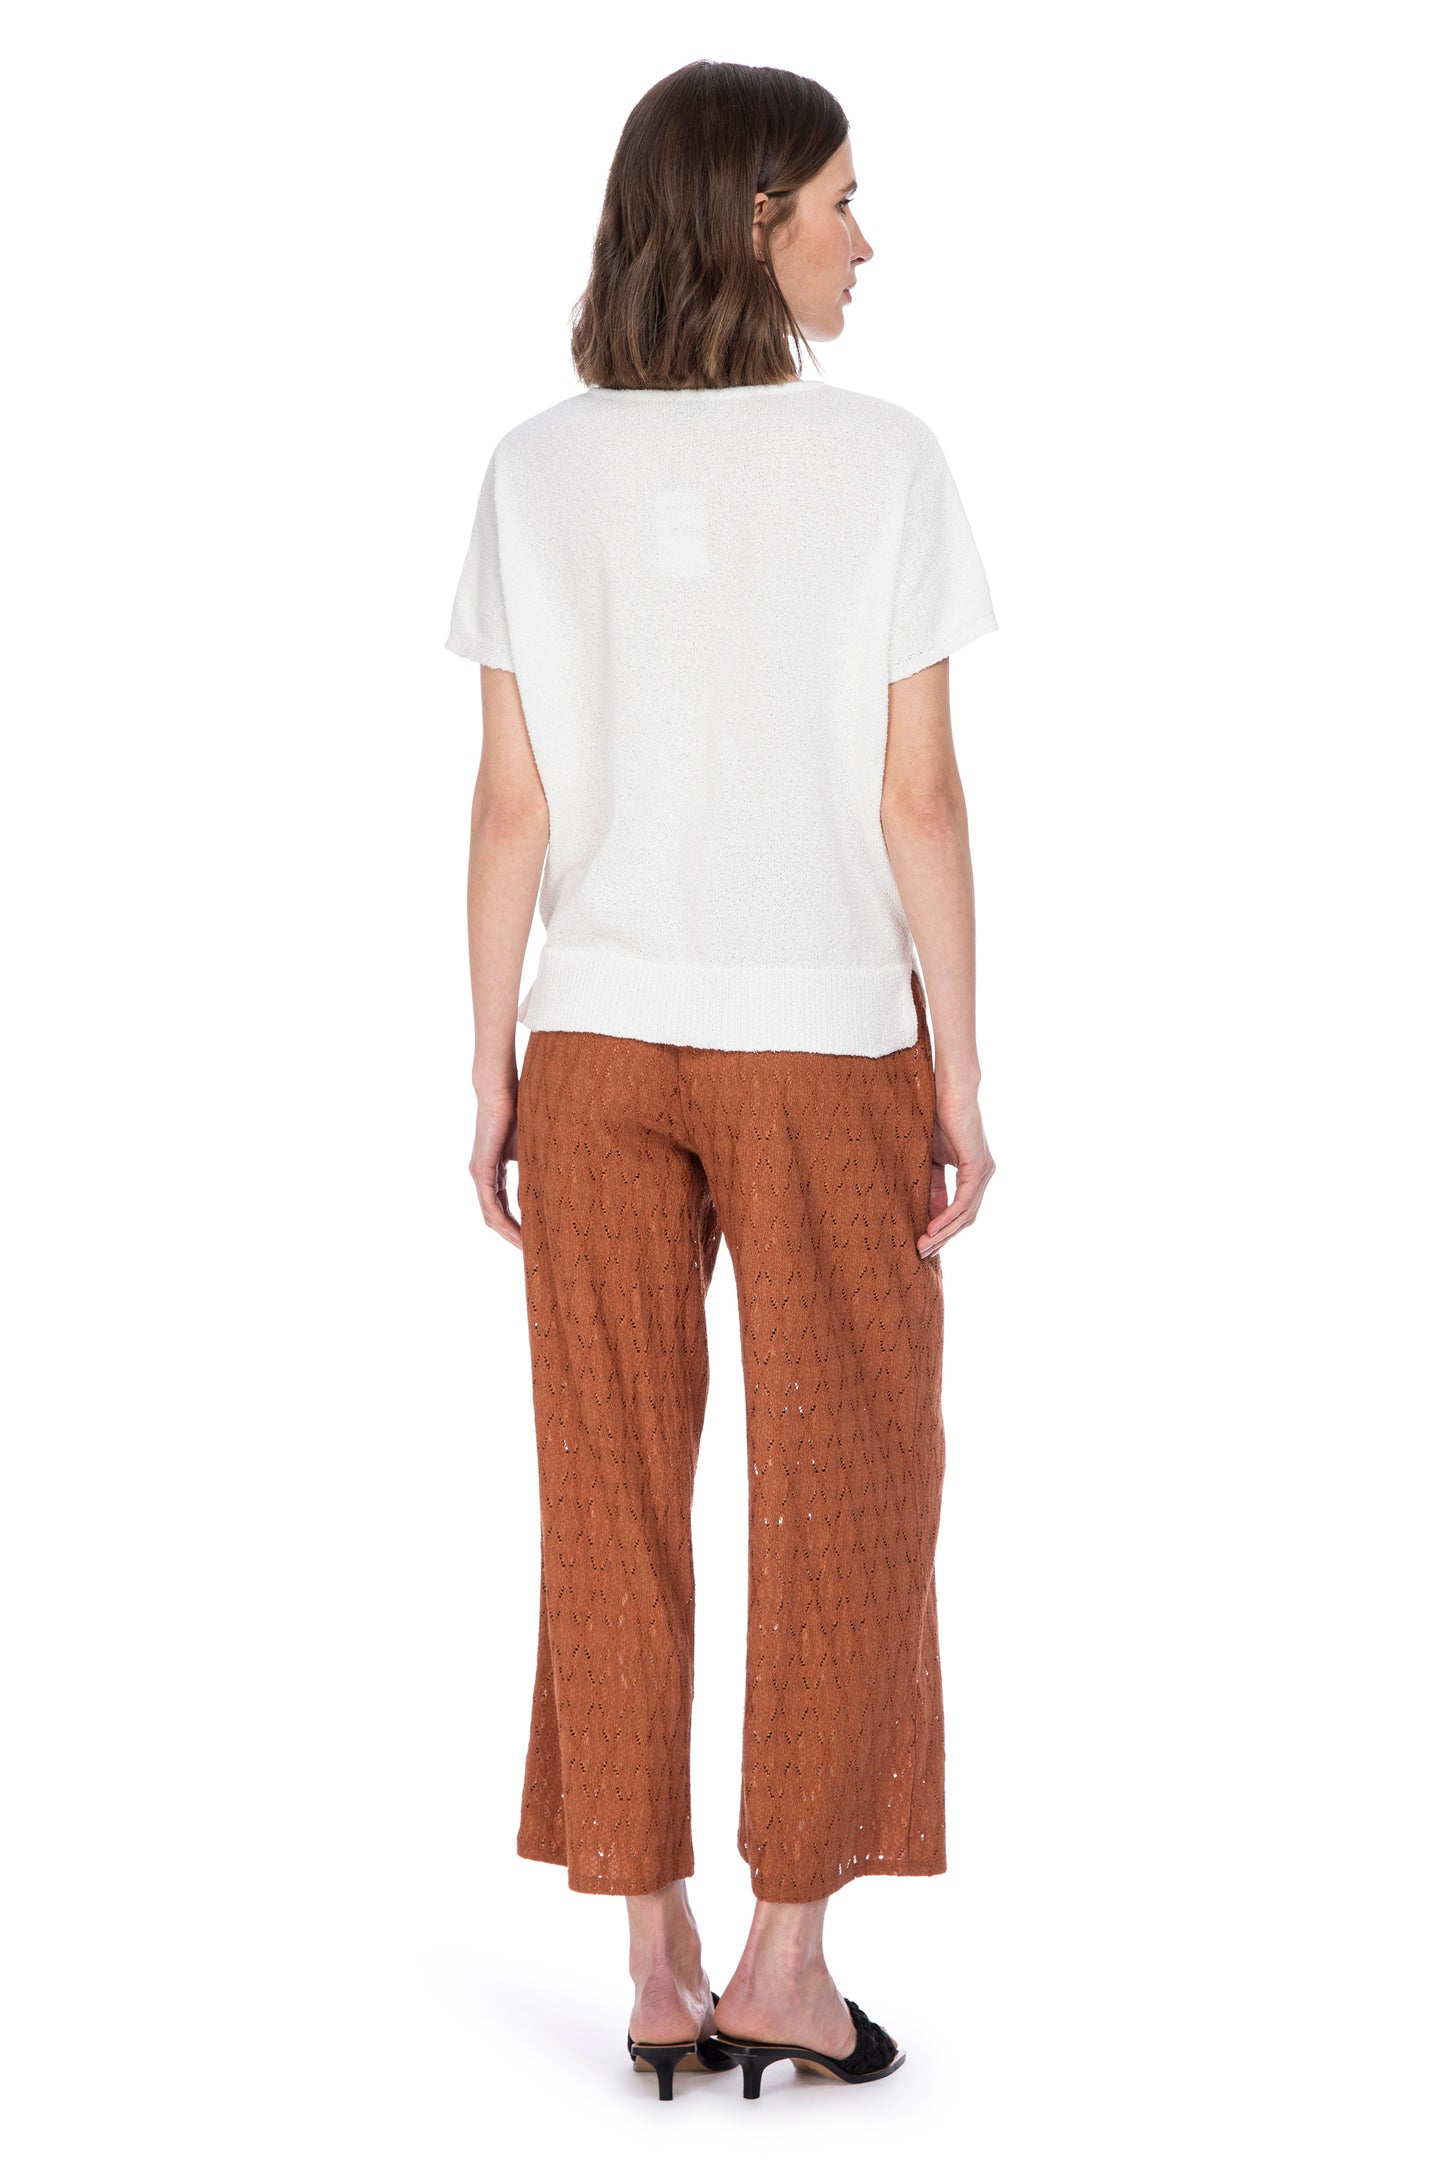 A woman seen from behind, wearing a casual white t-shirt paired with stylish brown elastic waist ANKLE LENGTH PANTS in a lace-patterned stretch pointelle knit and classic black heels by B Collection by Bobeau.